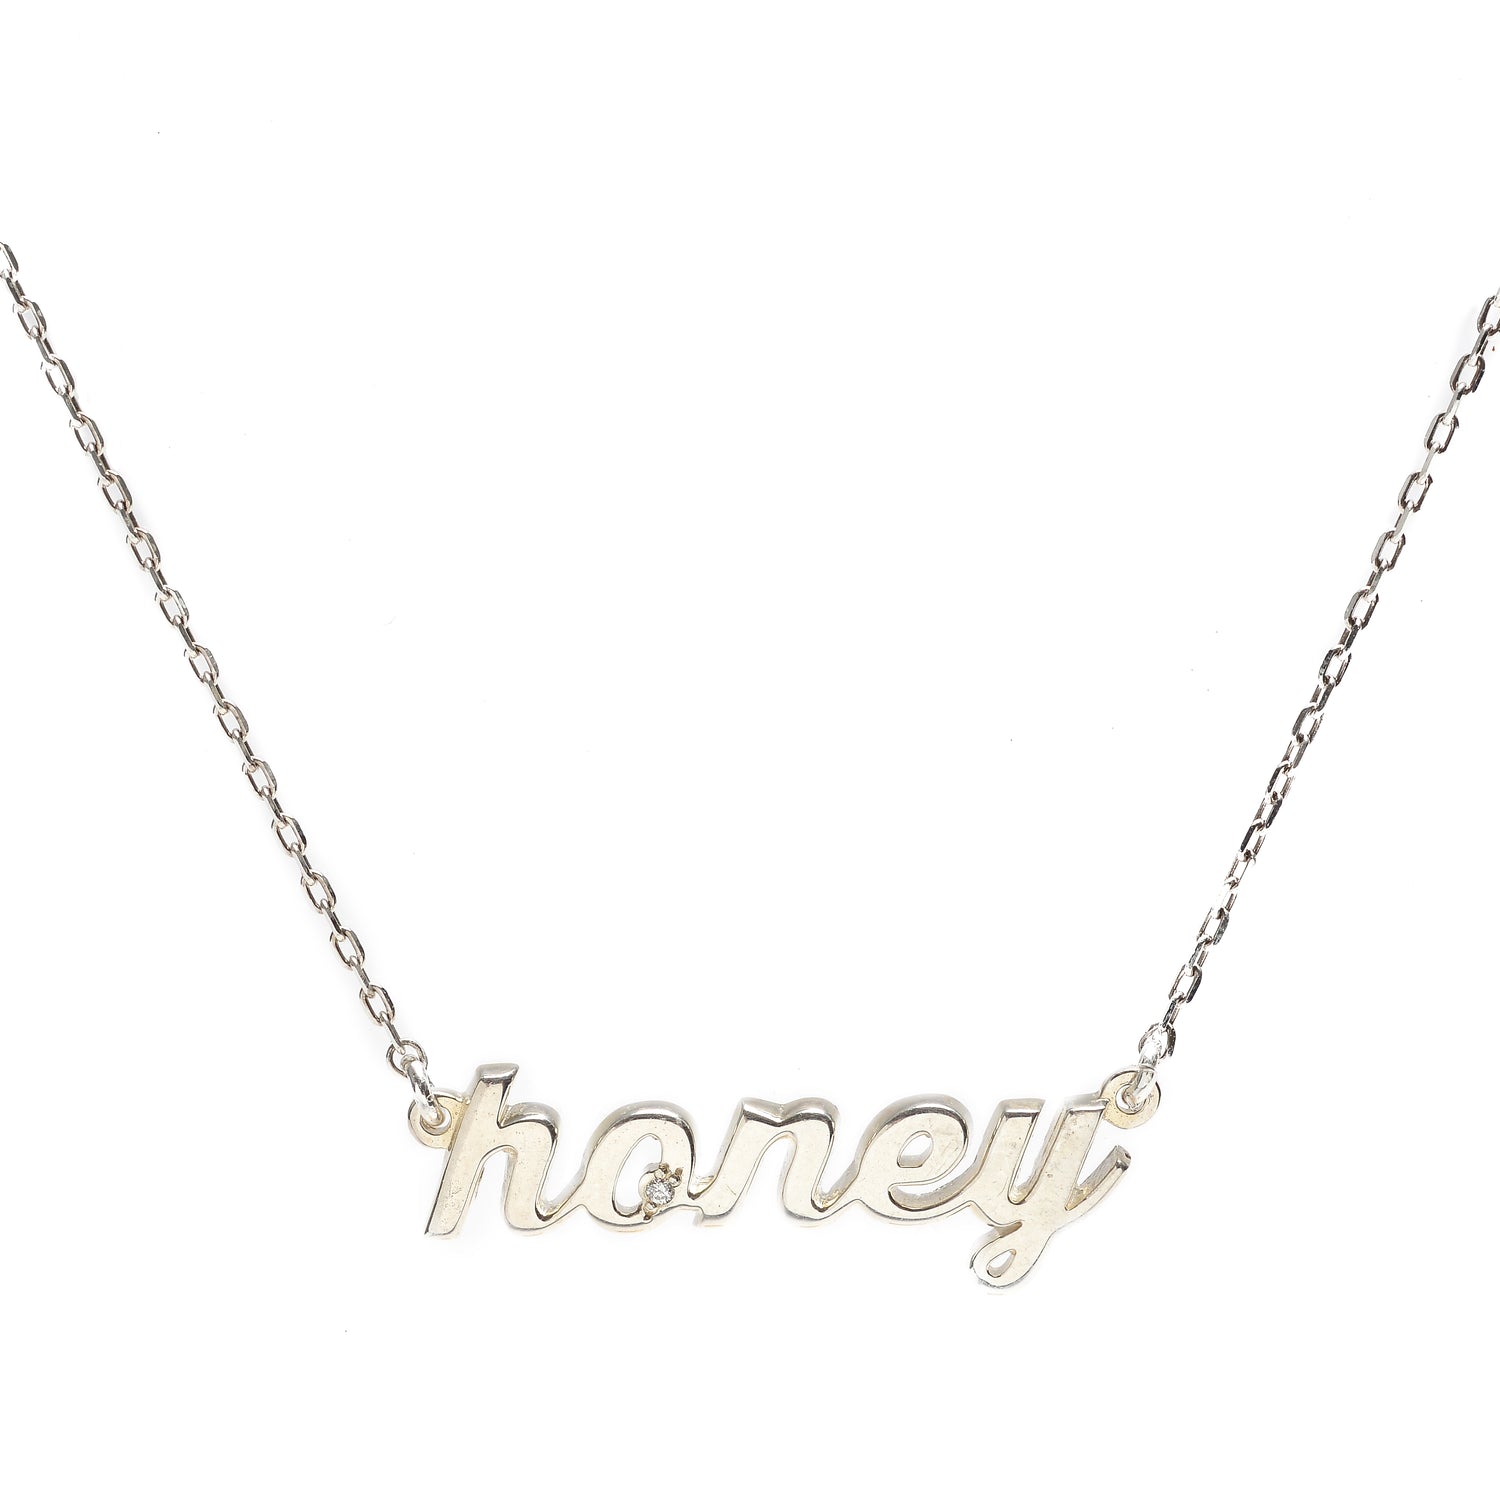 Honey Necklace - Bing Bang Jewelry NYC